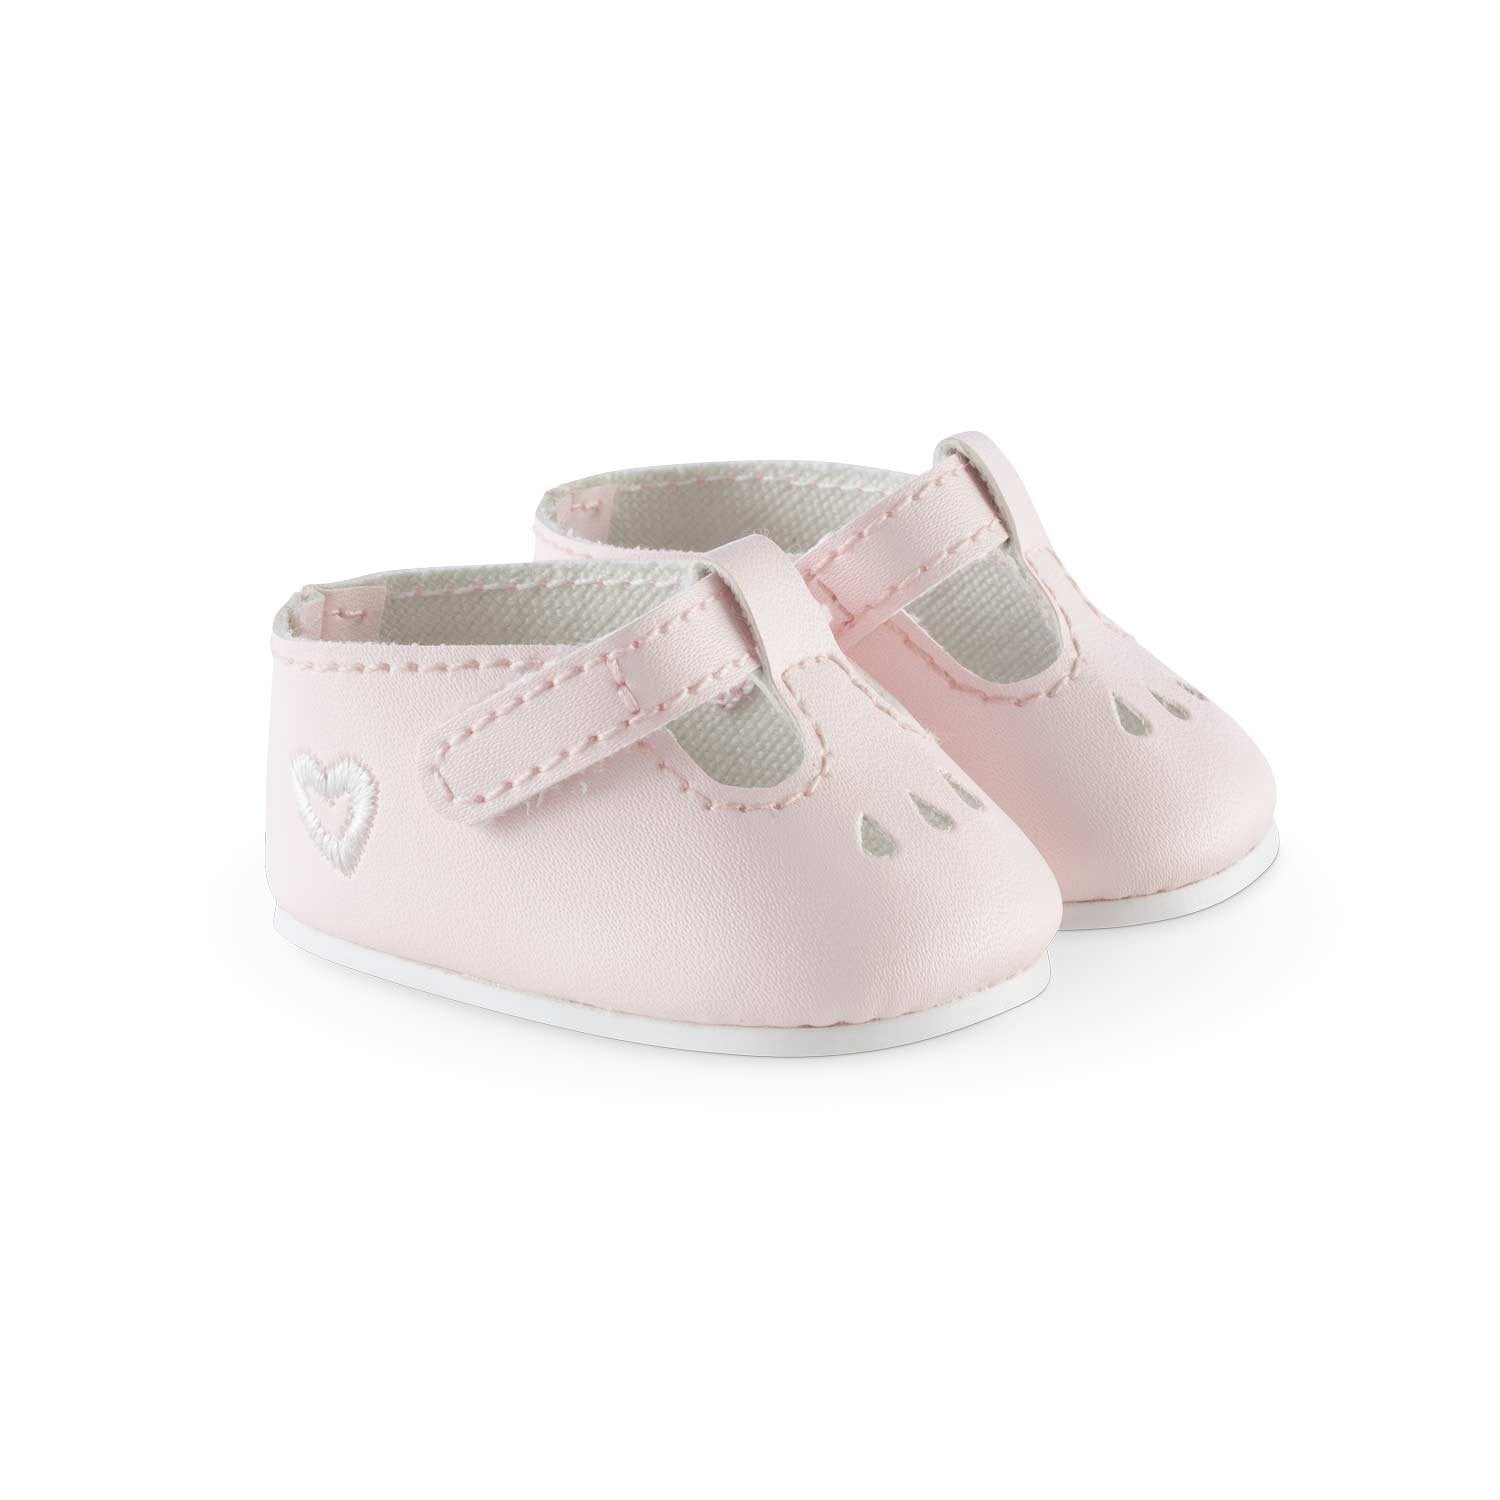 Corolle - Mon Classique - Clothing Shoes with Strap - Pink - 36cm Baby